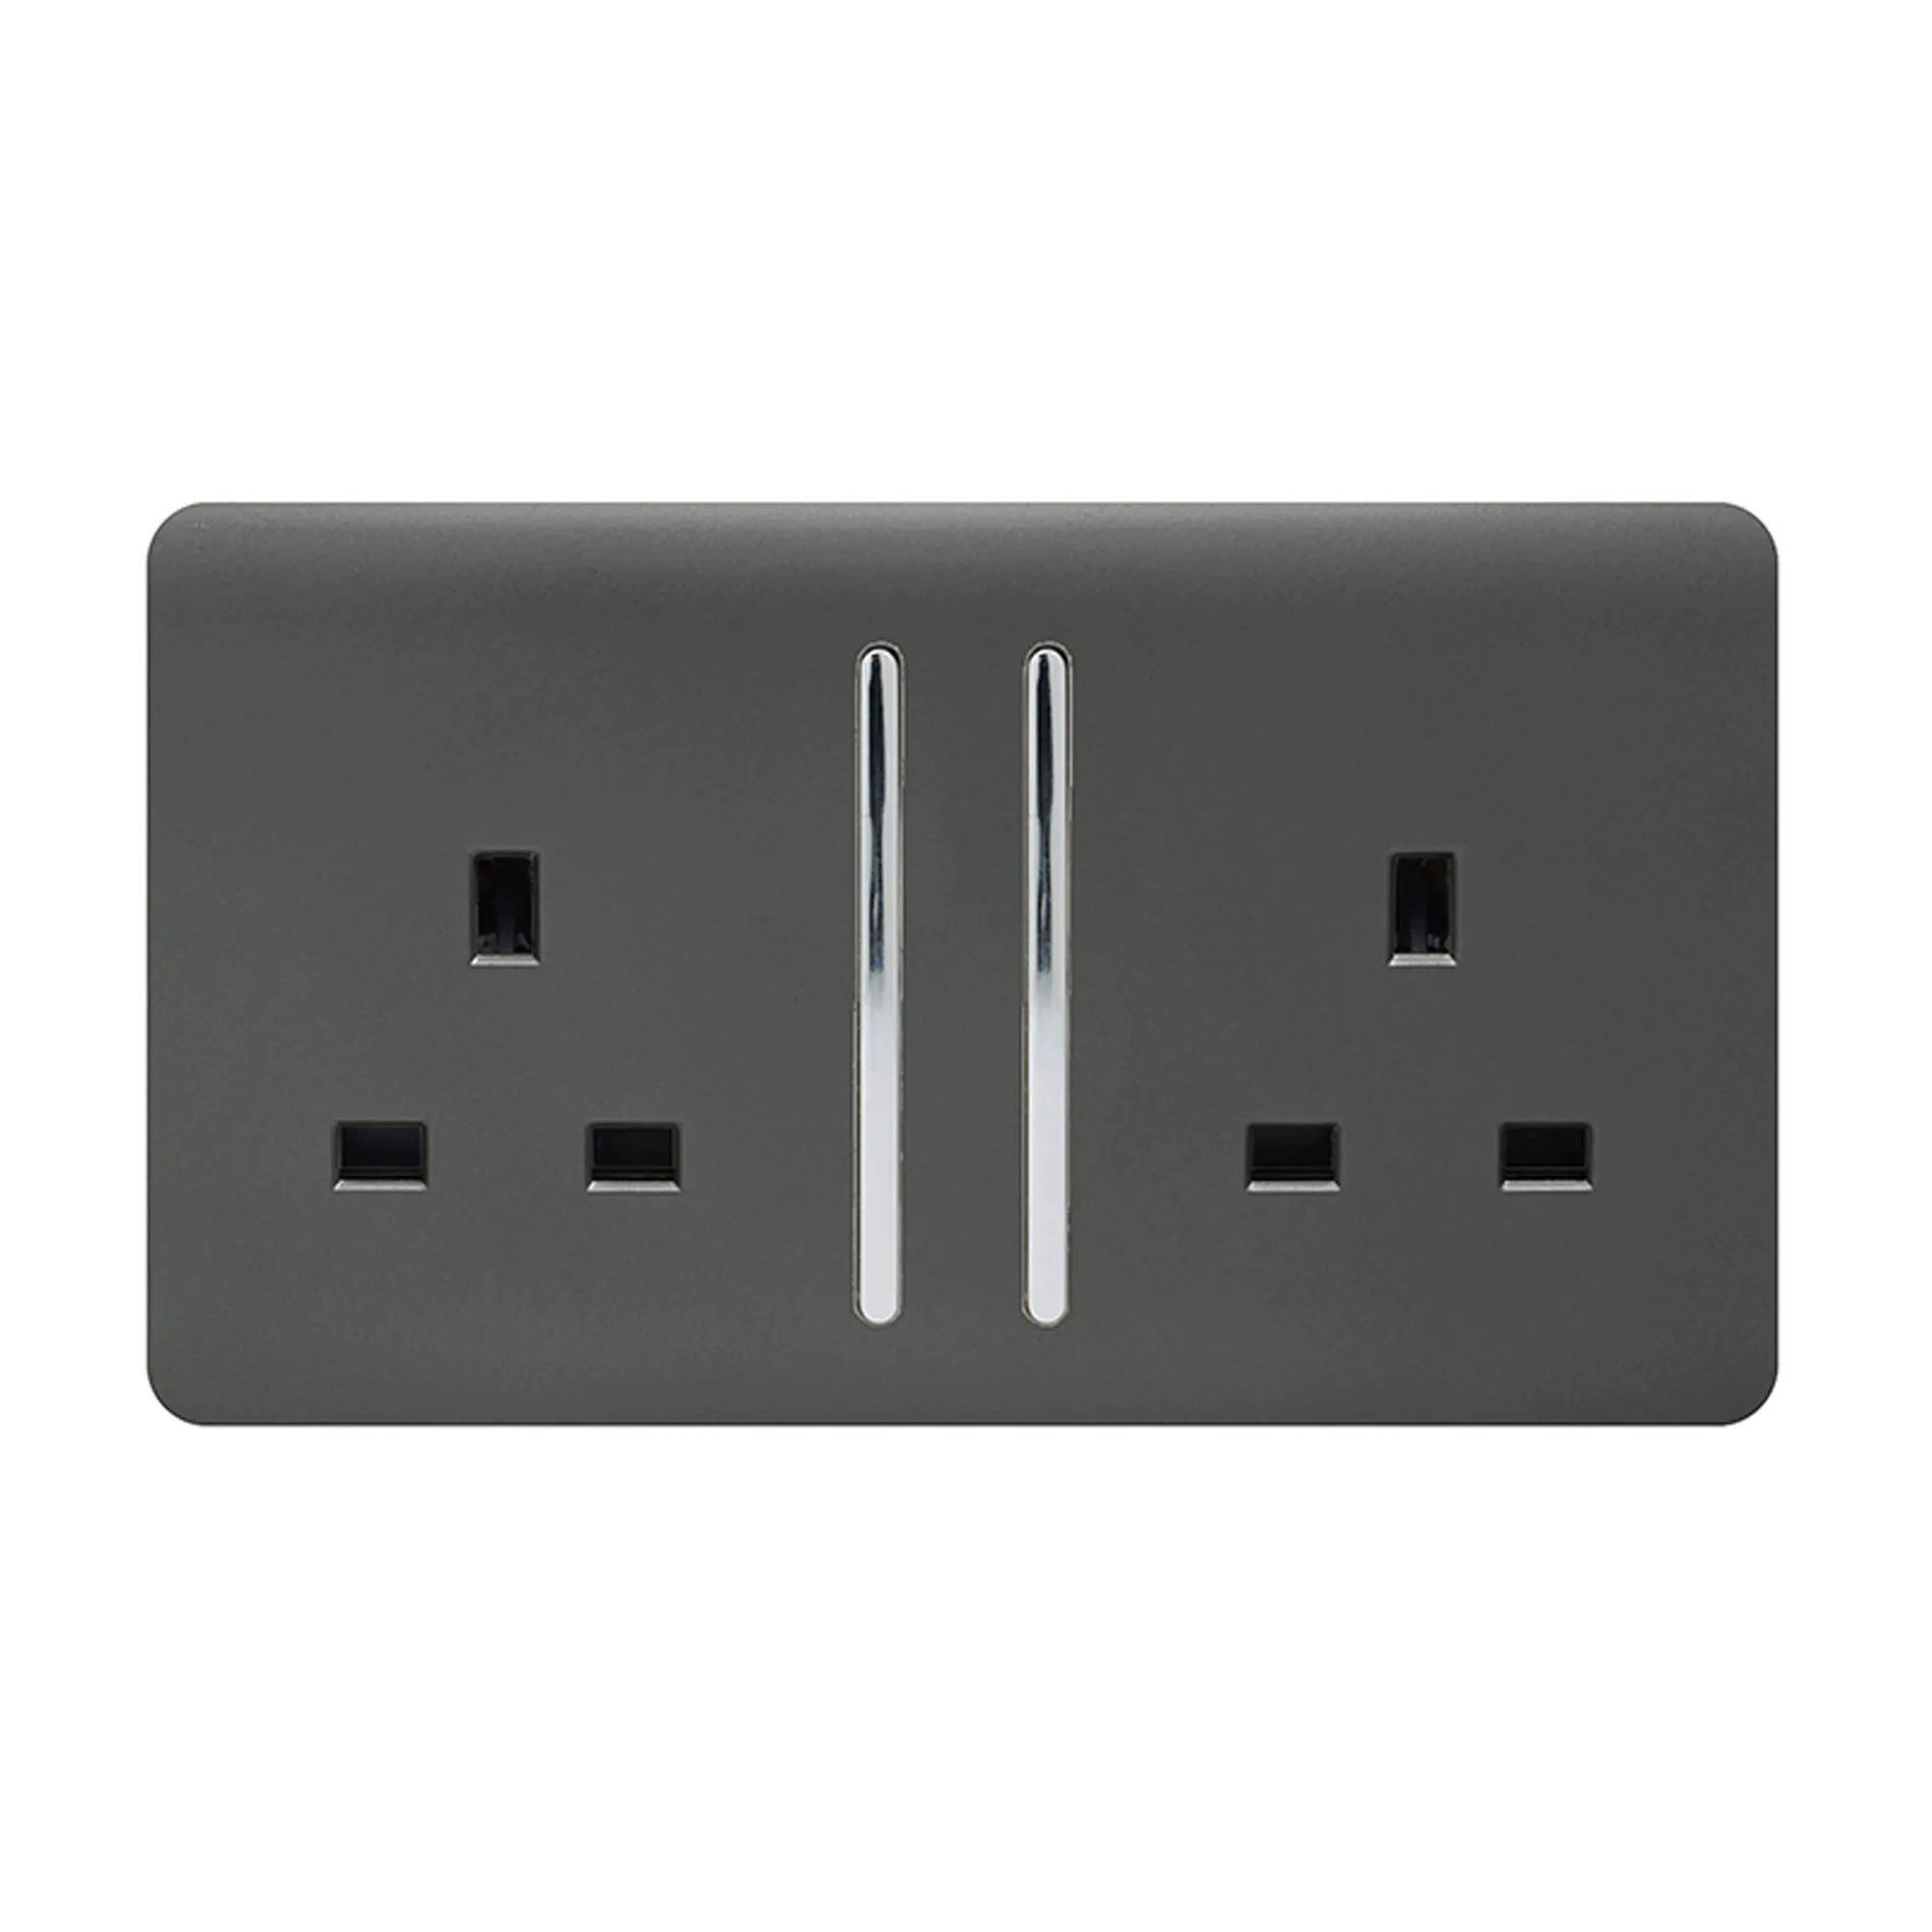 2 Gang 13Amp Long Switched Double Socket Chrome Rocker Charcoal Finish